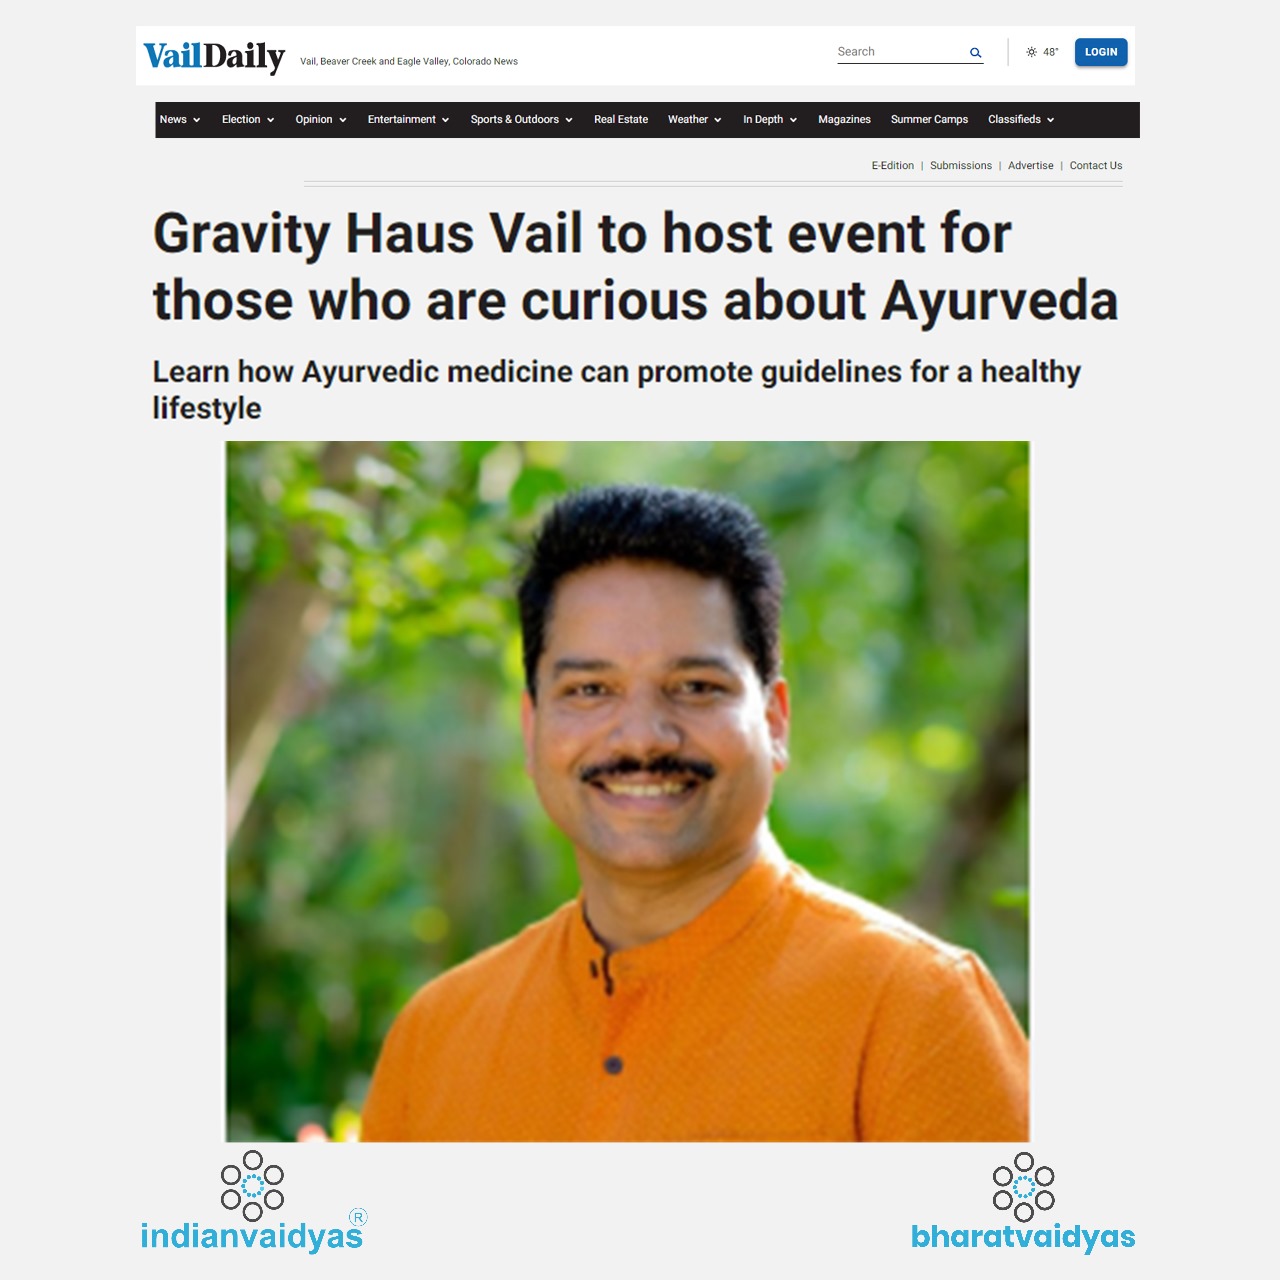 Gravity Haus Vail to host event for those who are curious about Ayurveda